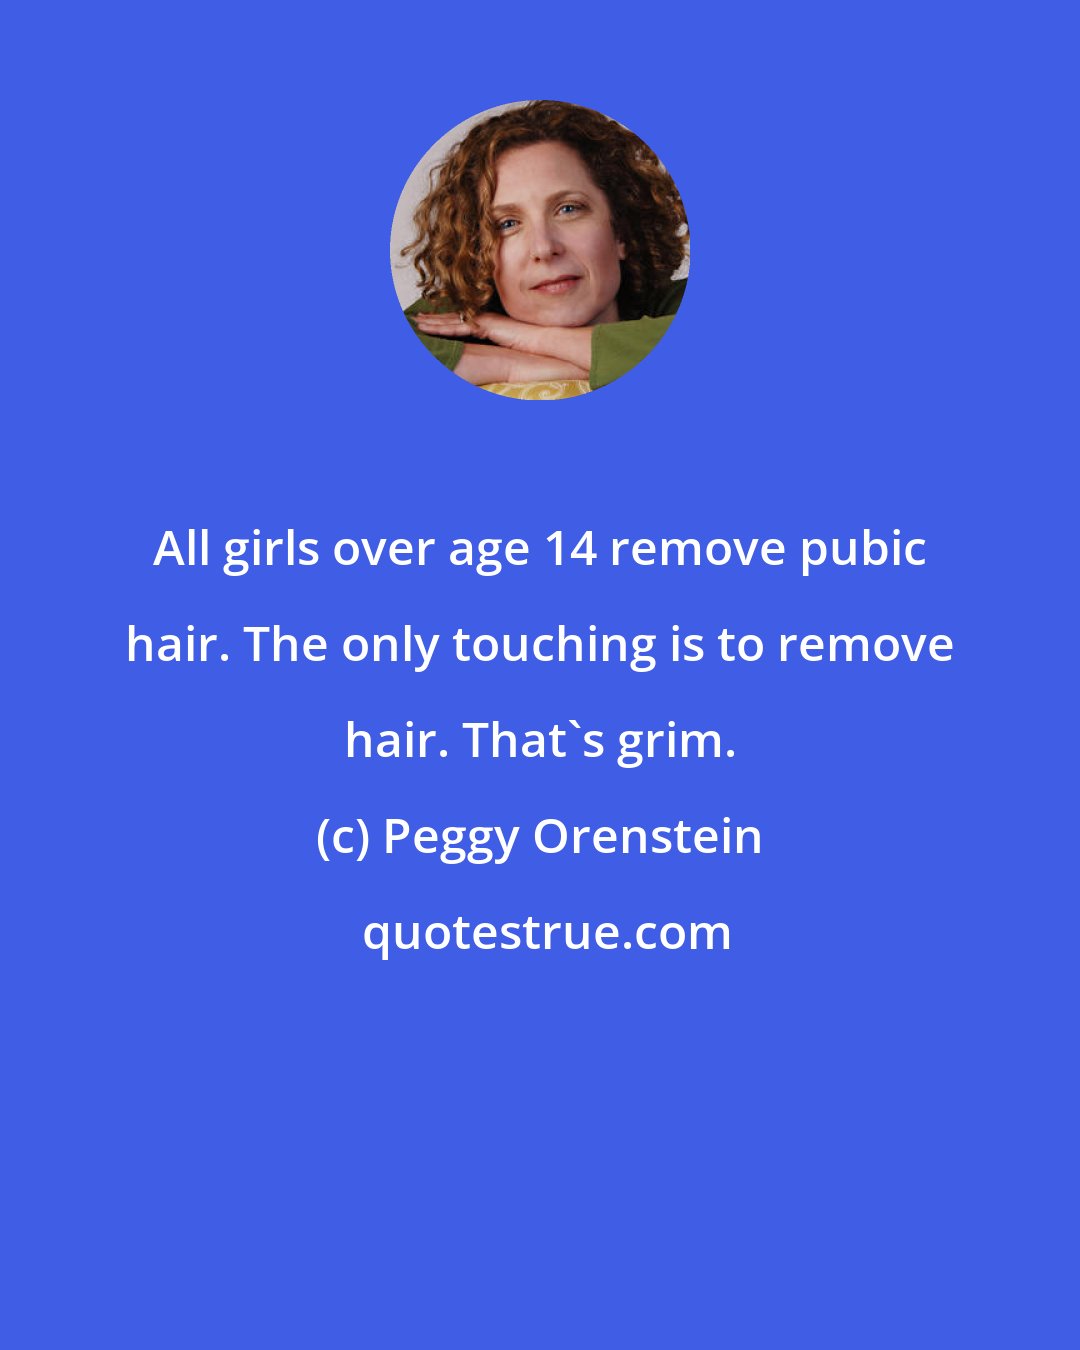 Peggy Orenstein: All girls over age 14 remove pubic hair. The only touching is to remove hair. That's grim.